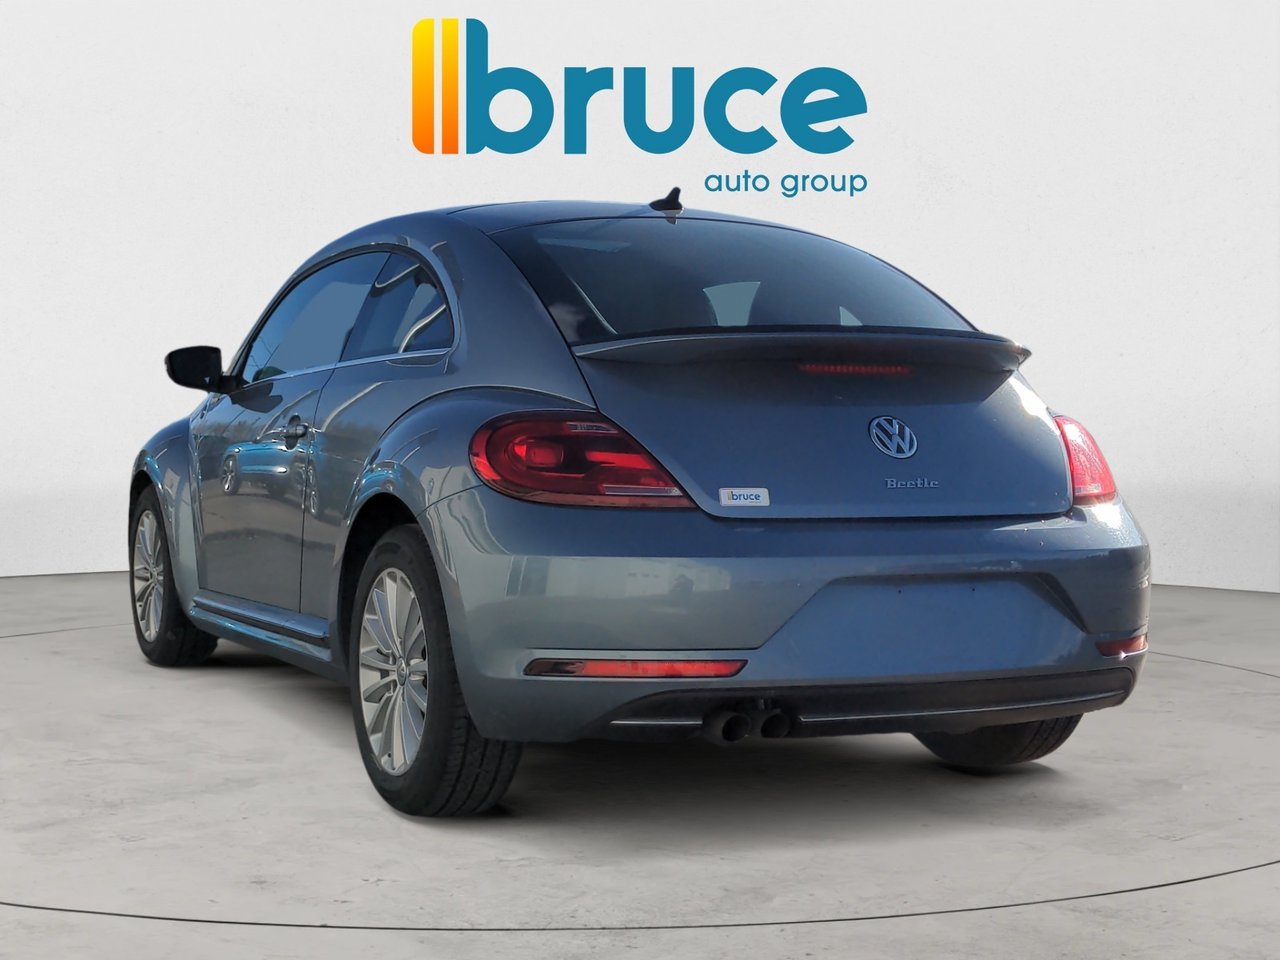 2019 Volkswagen Beetle WOLFSBURG EDITION (RATES STARTING AT 4.99%) 2 YEAR/40K CERTIFIED WARRANTY AVAILABLE, RATES AS LOW AS 4.99%